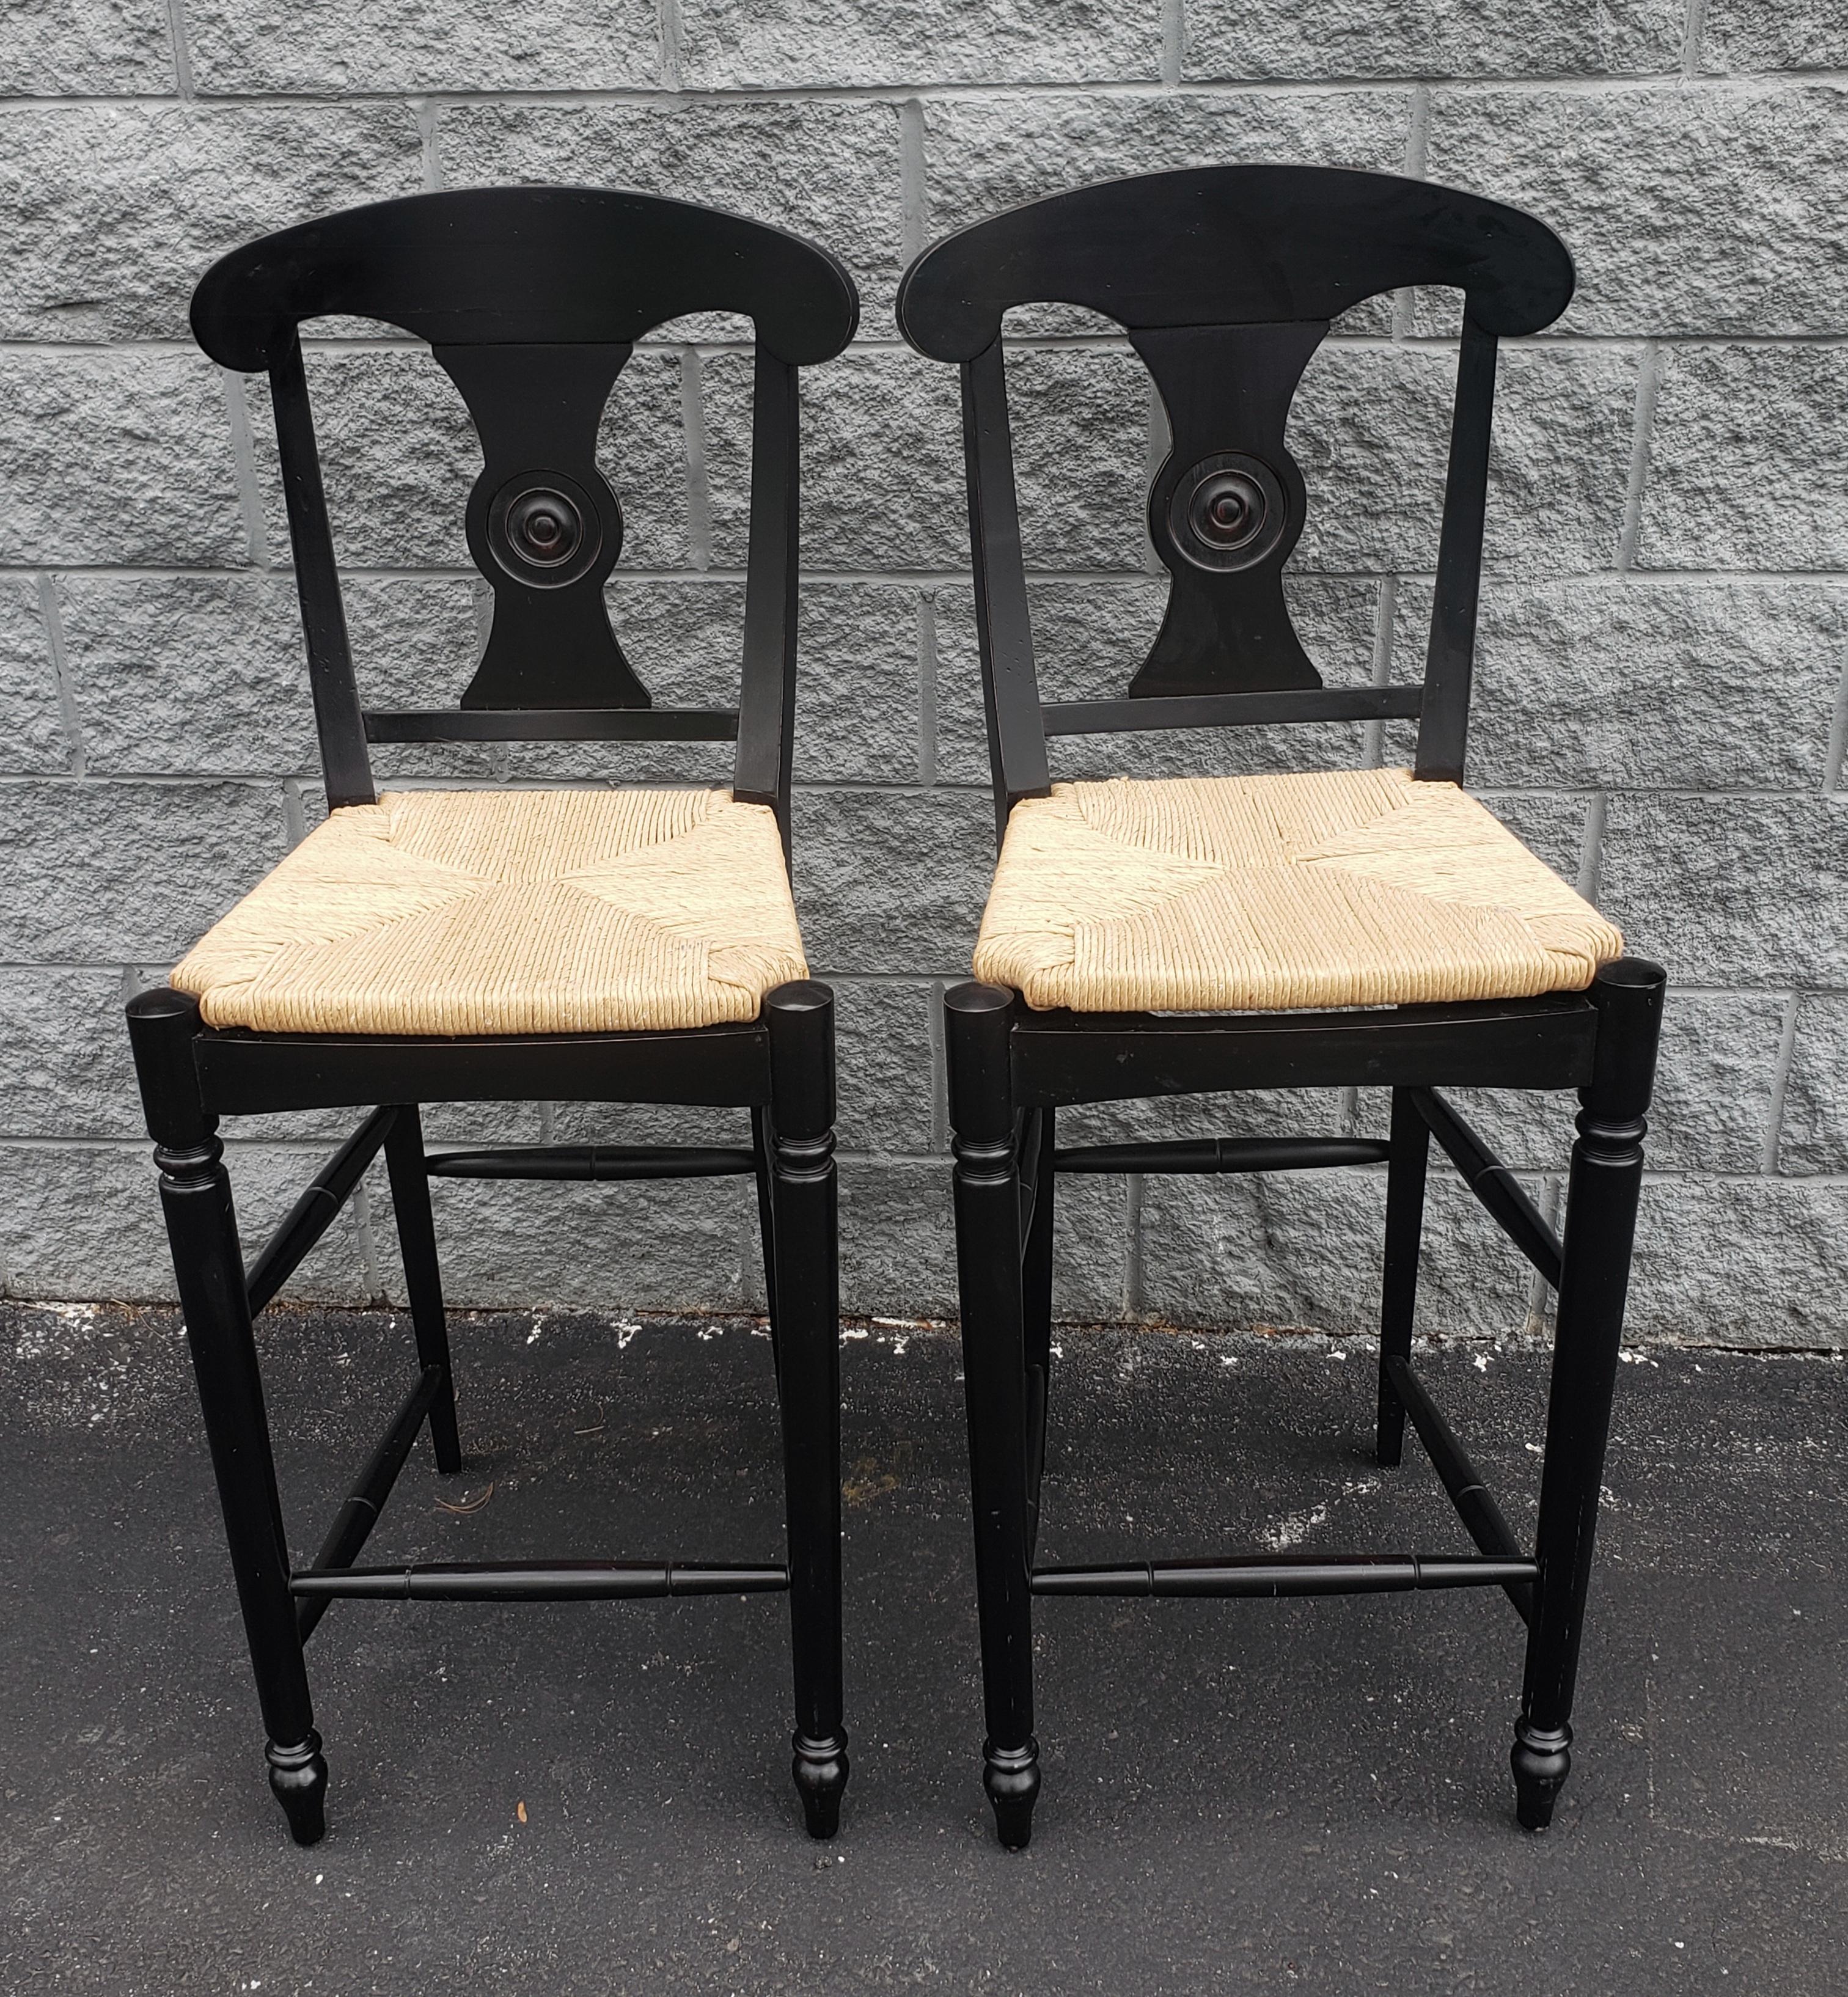 Magnificent pair of Ethan Allen Vintage French Country Rush Seat Bar Stools in Black. Very good vintage condition.